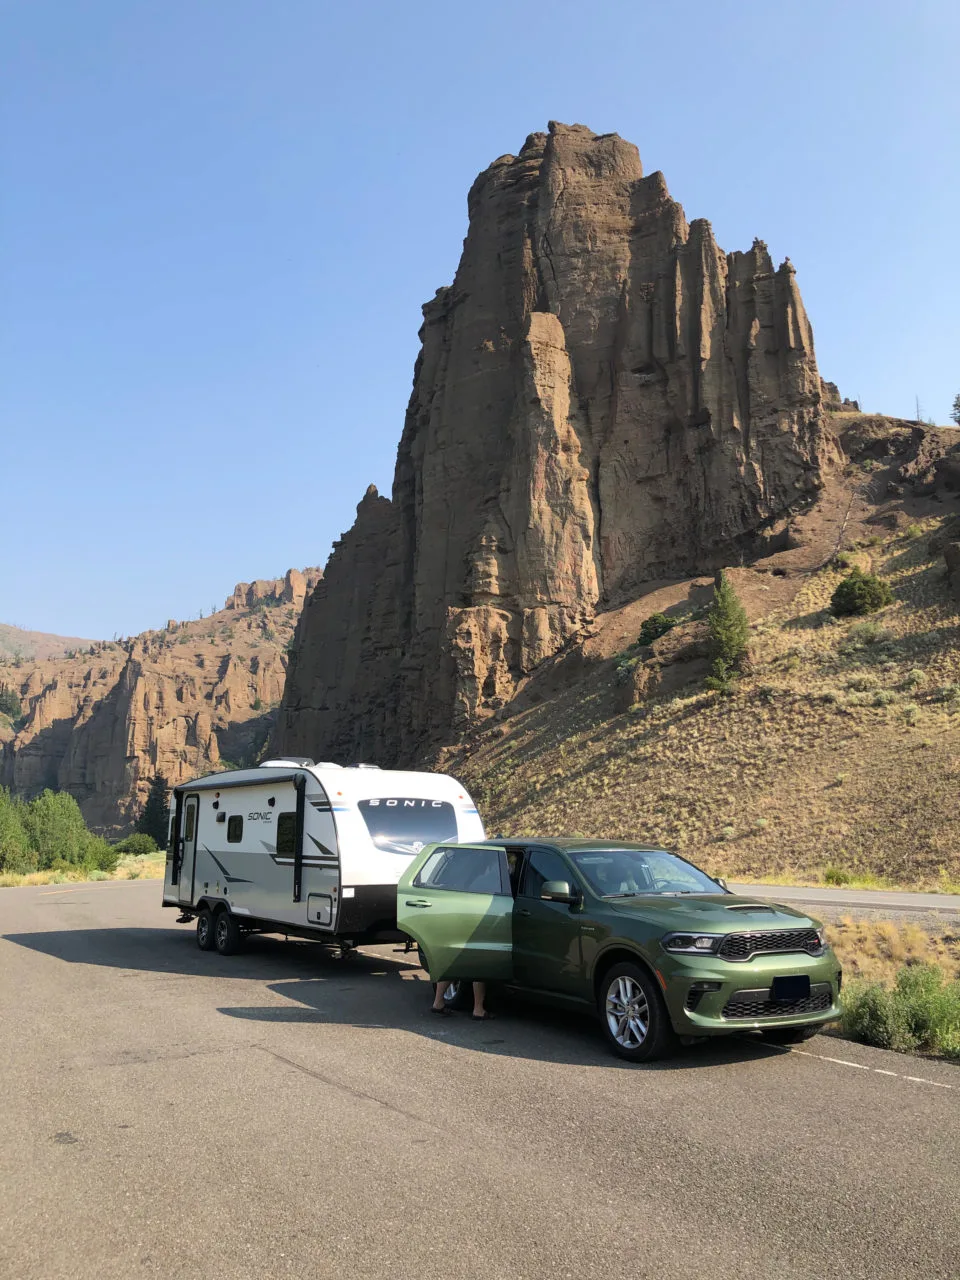 At a pull-out near Cody, Wyoming, we parked the RV for the amazing views.